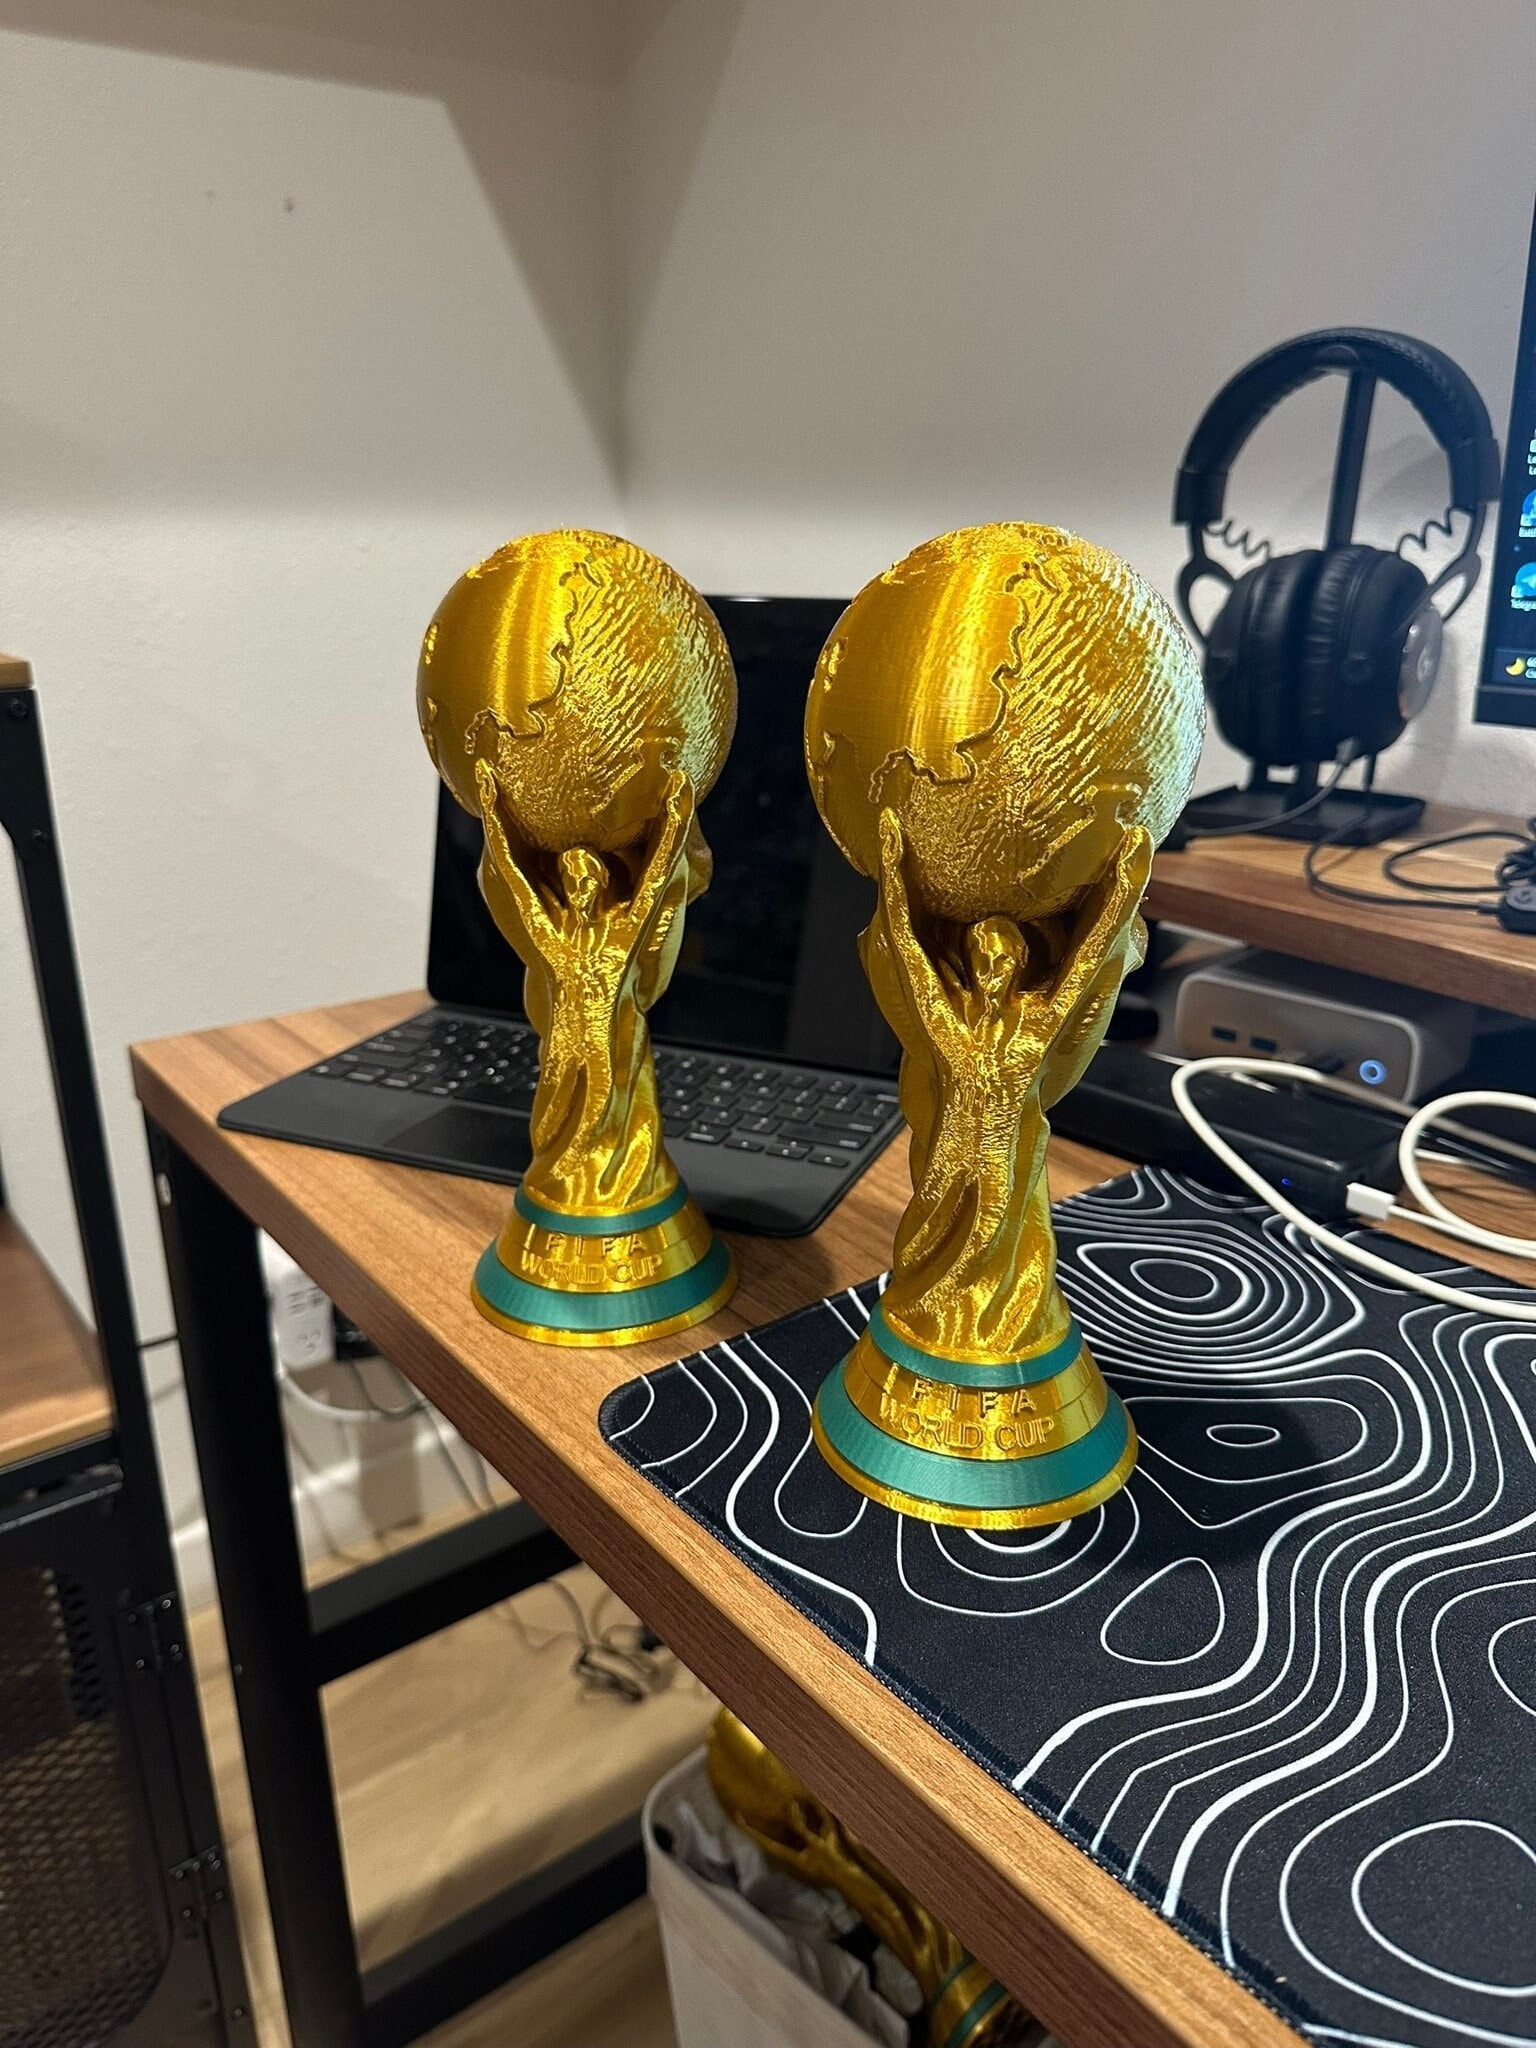 FIFA World Cup Trophy Replica in an Acrylic Case (Trophy Size 40 mm)